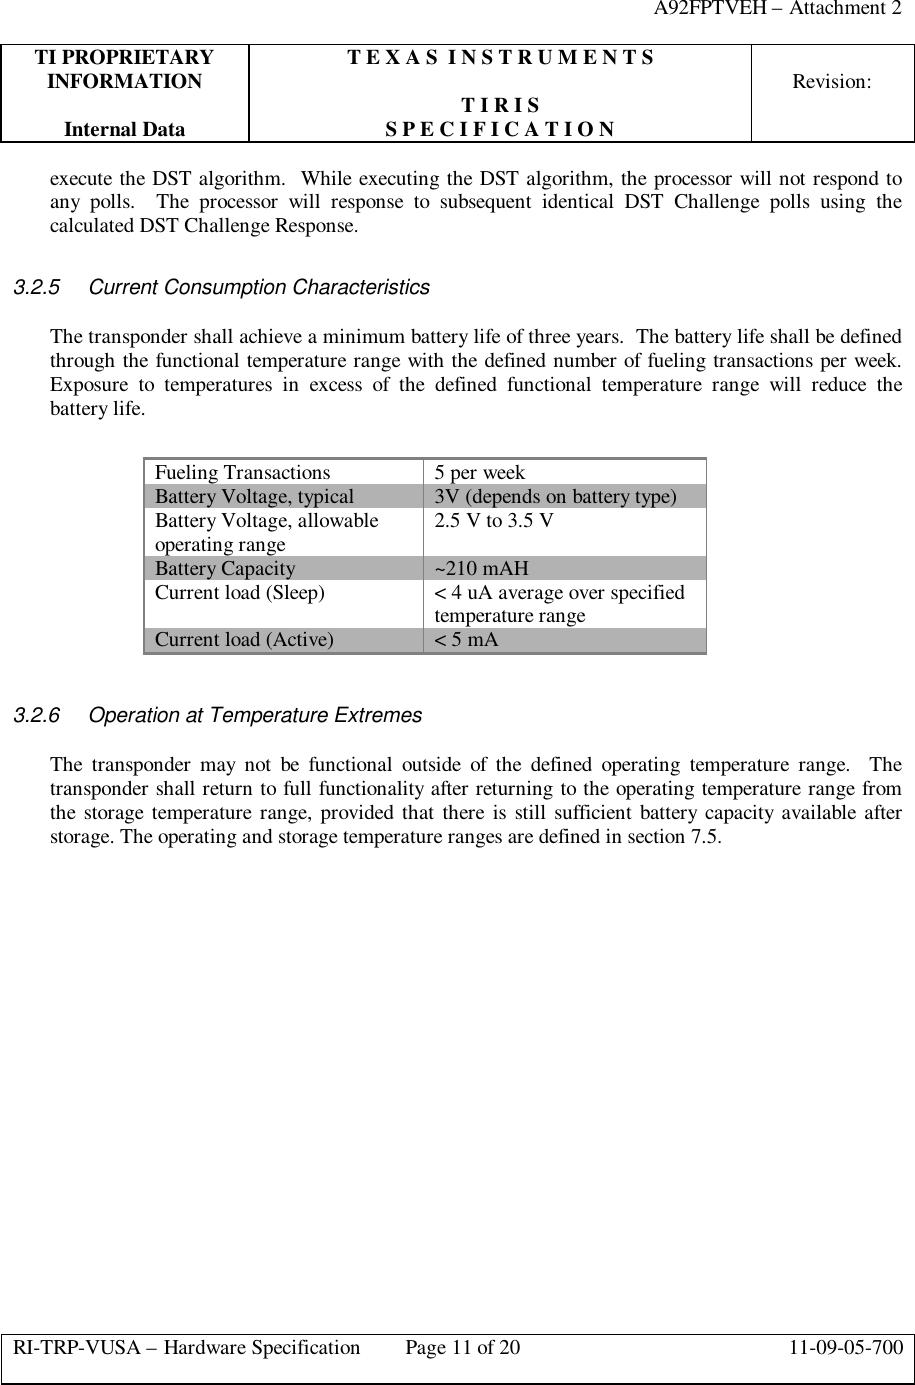 A92FPTVEH – Attachment 2TI PROPRIETARY T E X A S  I N S T R U M E N T SINFORMATION Revision:T I R I SInternal Data S P E C I F I C A T I O NRI-TRP-VUSA – Hardware Specification Page 11 of 20 11-09-05-700execute the DST algorithm.  While executing the DST algorithm, the processor will not respond toany polls.  The processor will response to subsequent identical DST Challenge polls using thecalculated DST Challenge Response.3.2.5 Current Consumption CharacteristicsThe transponder shall achieve a minimum battery life of three years.  The battery life shall be definedthrough the functional temperature range with the defined number of fueling transactions per week.Exposure to temperatures in excess of the defined functional temperature range will reduce thebattery life.Fueling Transactions 5 per weekBattery Voltage, typical 3V (depends on battery type)Battery Voltage, allowableoperating range 2.5 V to 3.5 VBattery Capacity ~210 mAHCurrent load (Sleep) &lt; 4 uA average over specifiedtemperature rangeCurrent load (Active) &lt; 5 mA3.2.6 Operation at Temperature ExtremesThe transponder may not be functional outside of the defined operating temperature range.  Thetransponder shall return to full functionality after returning to the operating temperature range fromthe storage temperature range, provided that there is still sufficient battery capacity available afterstorage. The operating and storage temperature ranges are defined in section 7.5.